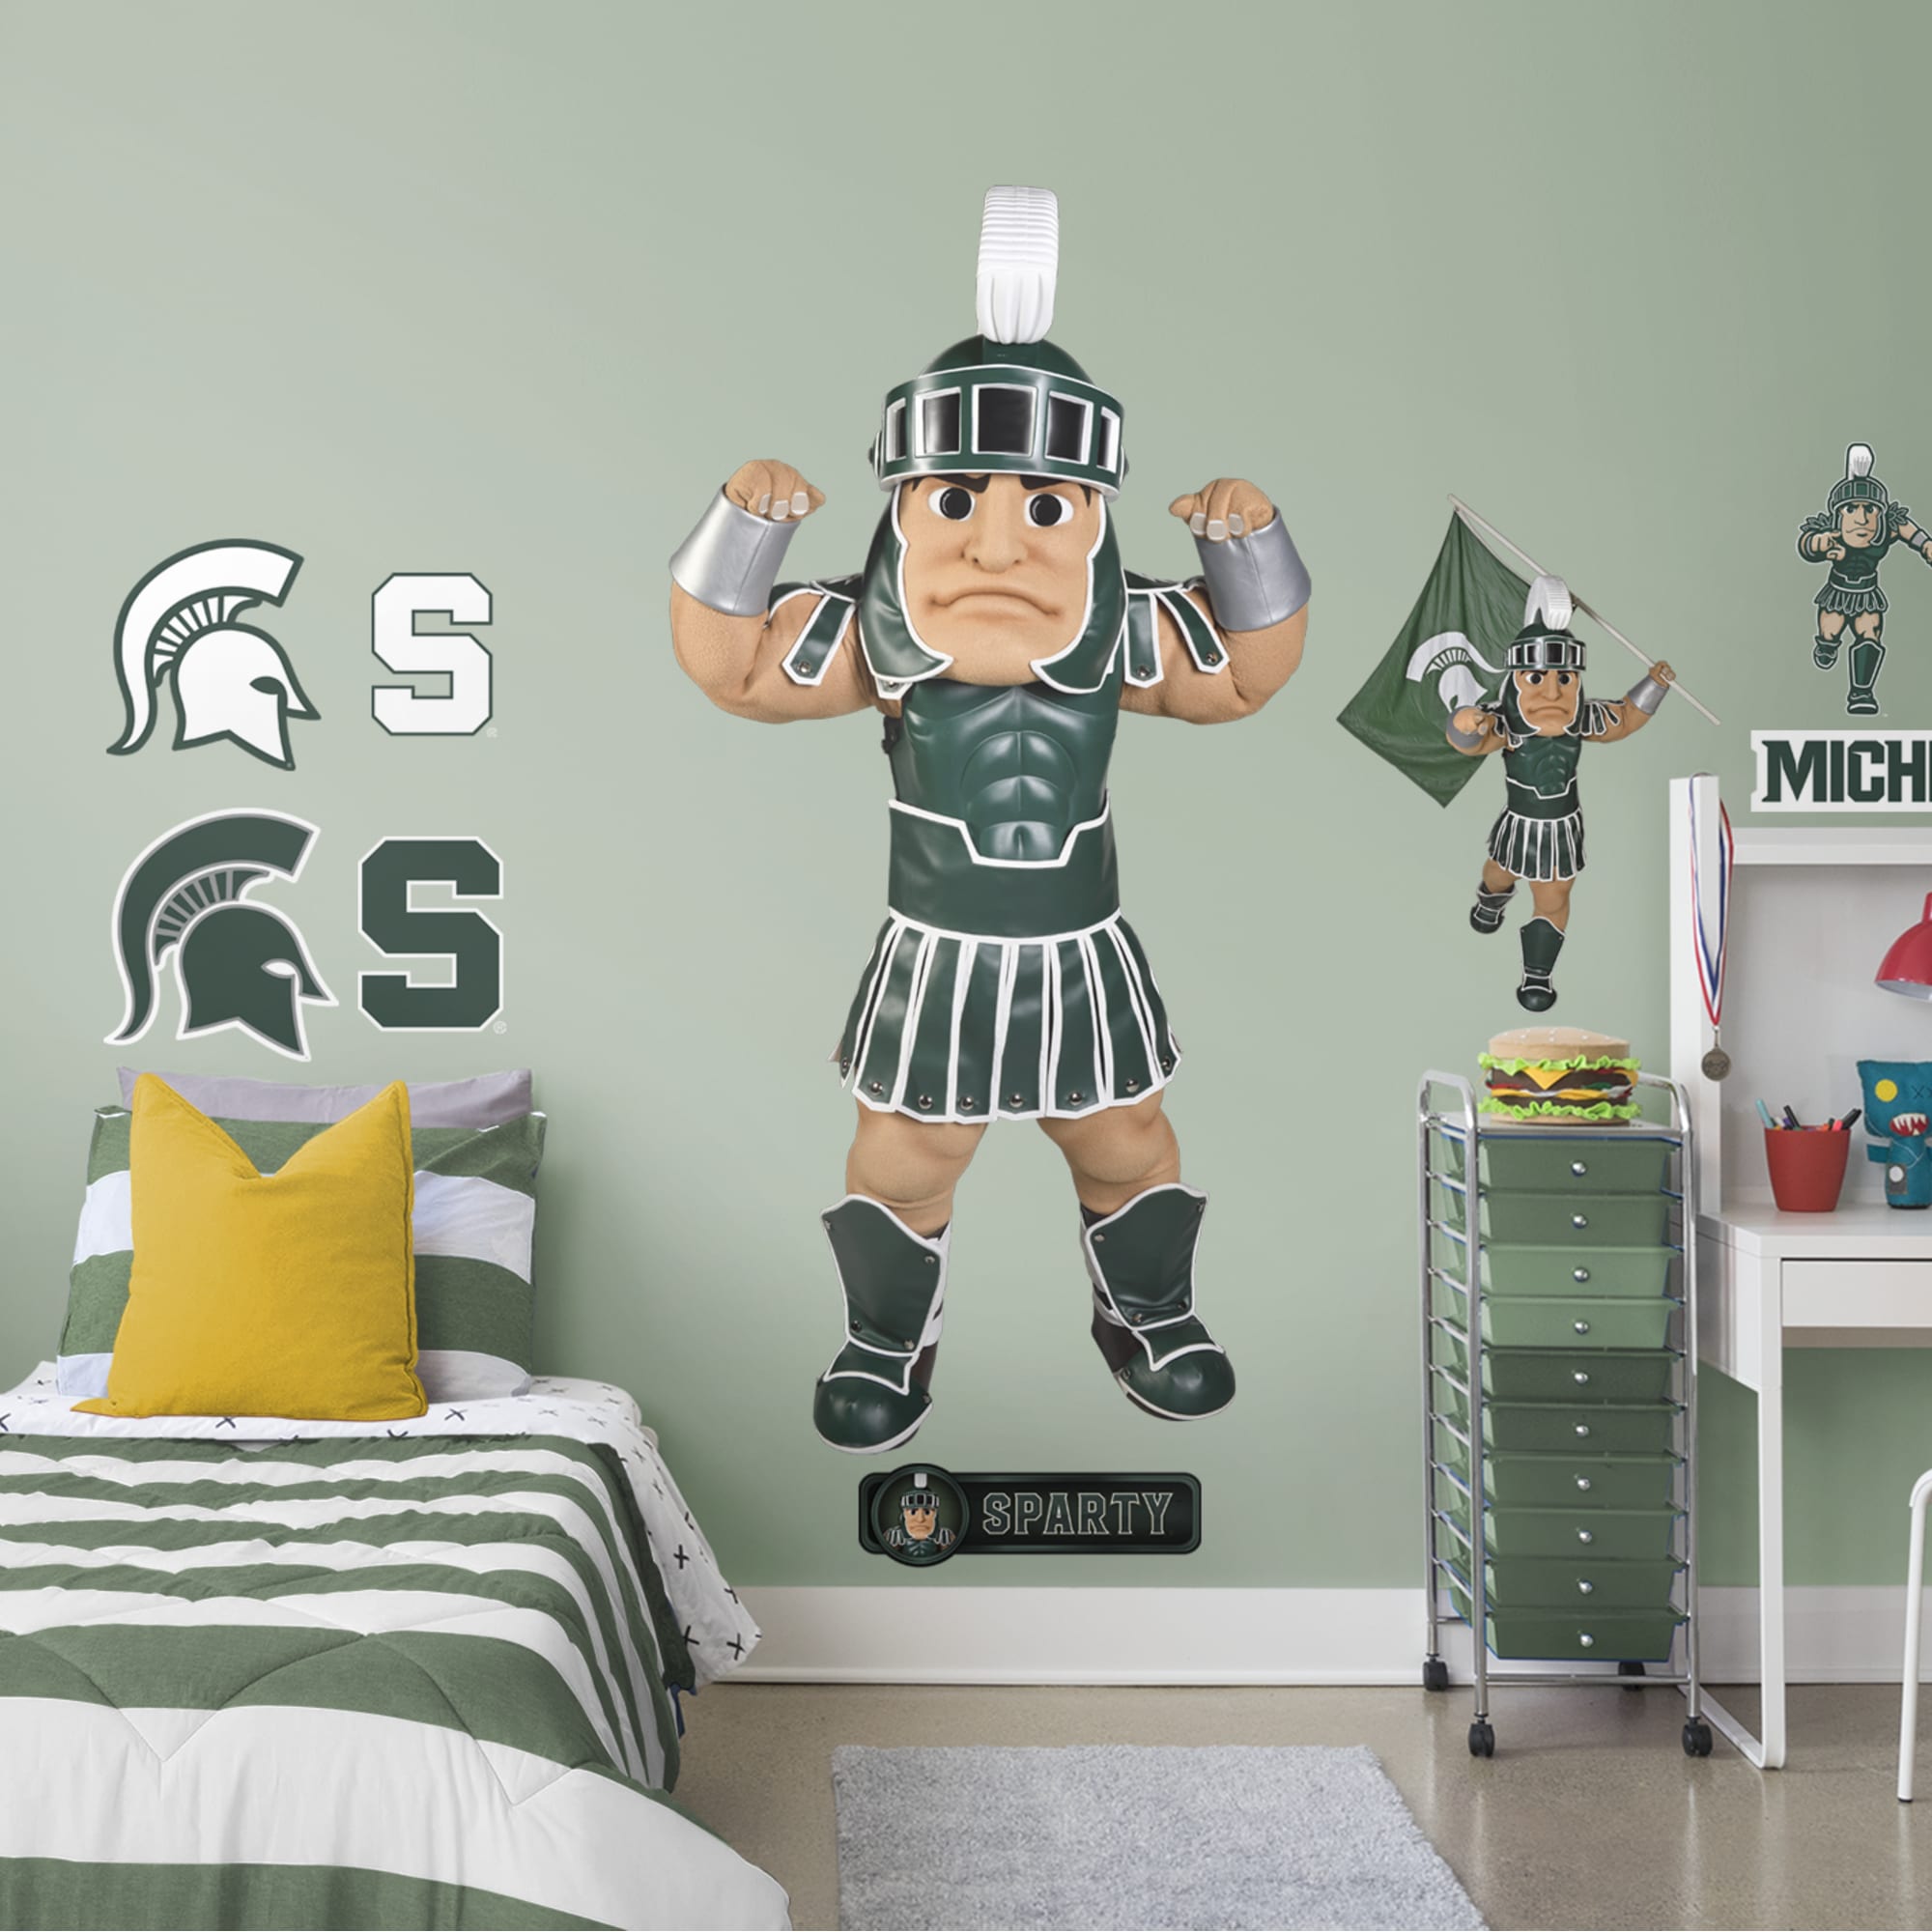 Michigan State Spartans: Sparty Mascot - Officially Licensed Removable Wall Decal Life-Size Mascot +10 Decals (40"W x 80"H) by F